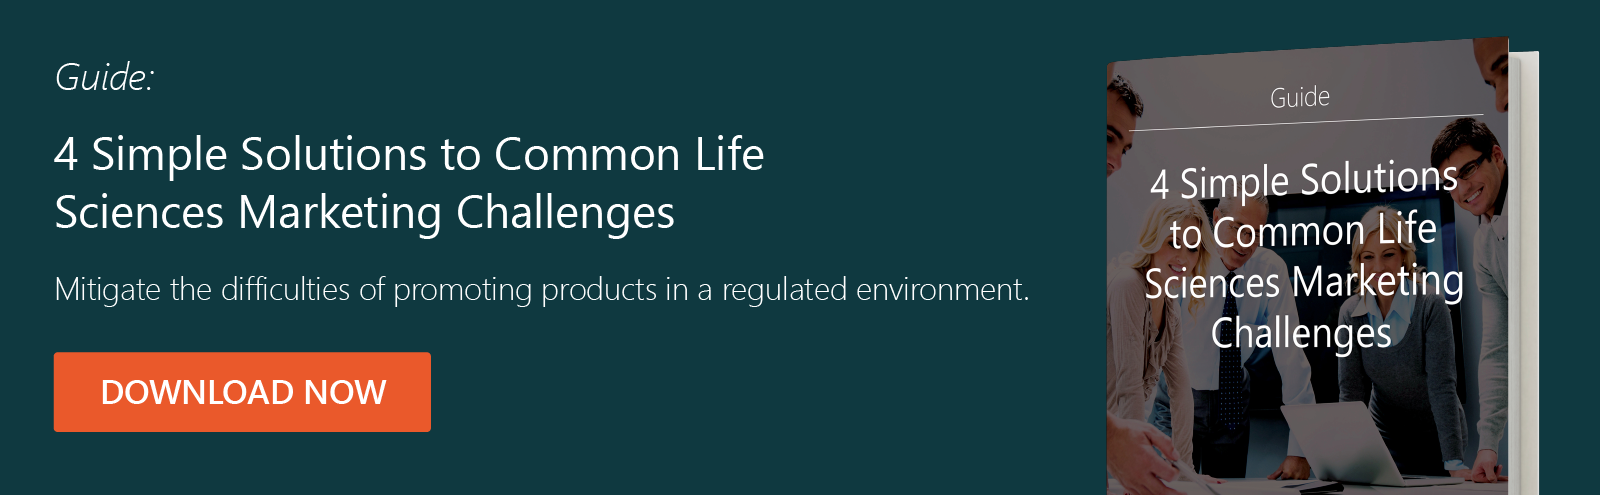 Simple Solutions to Common Life Sciences Marketing Challenges